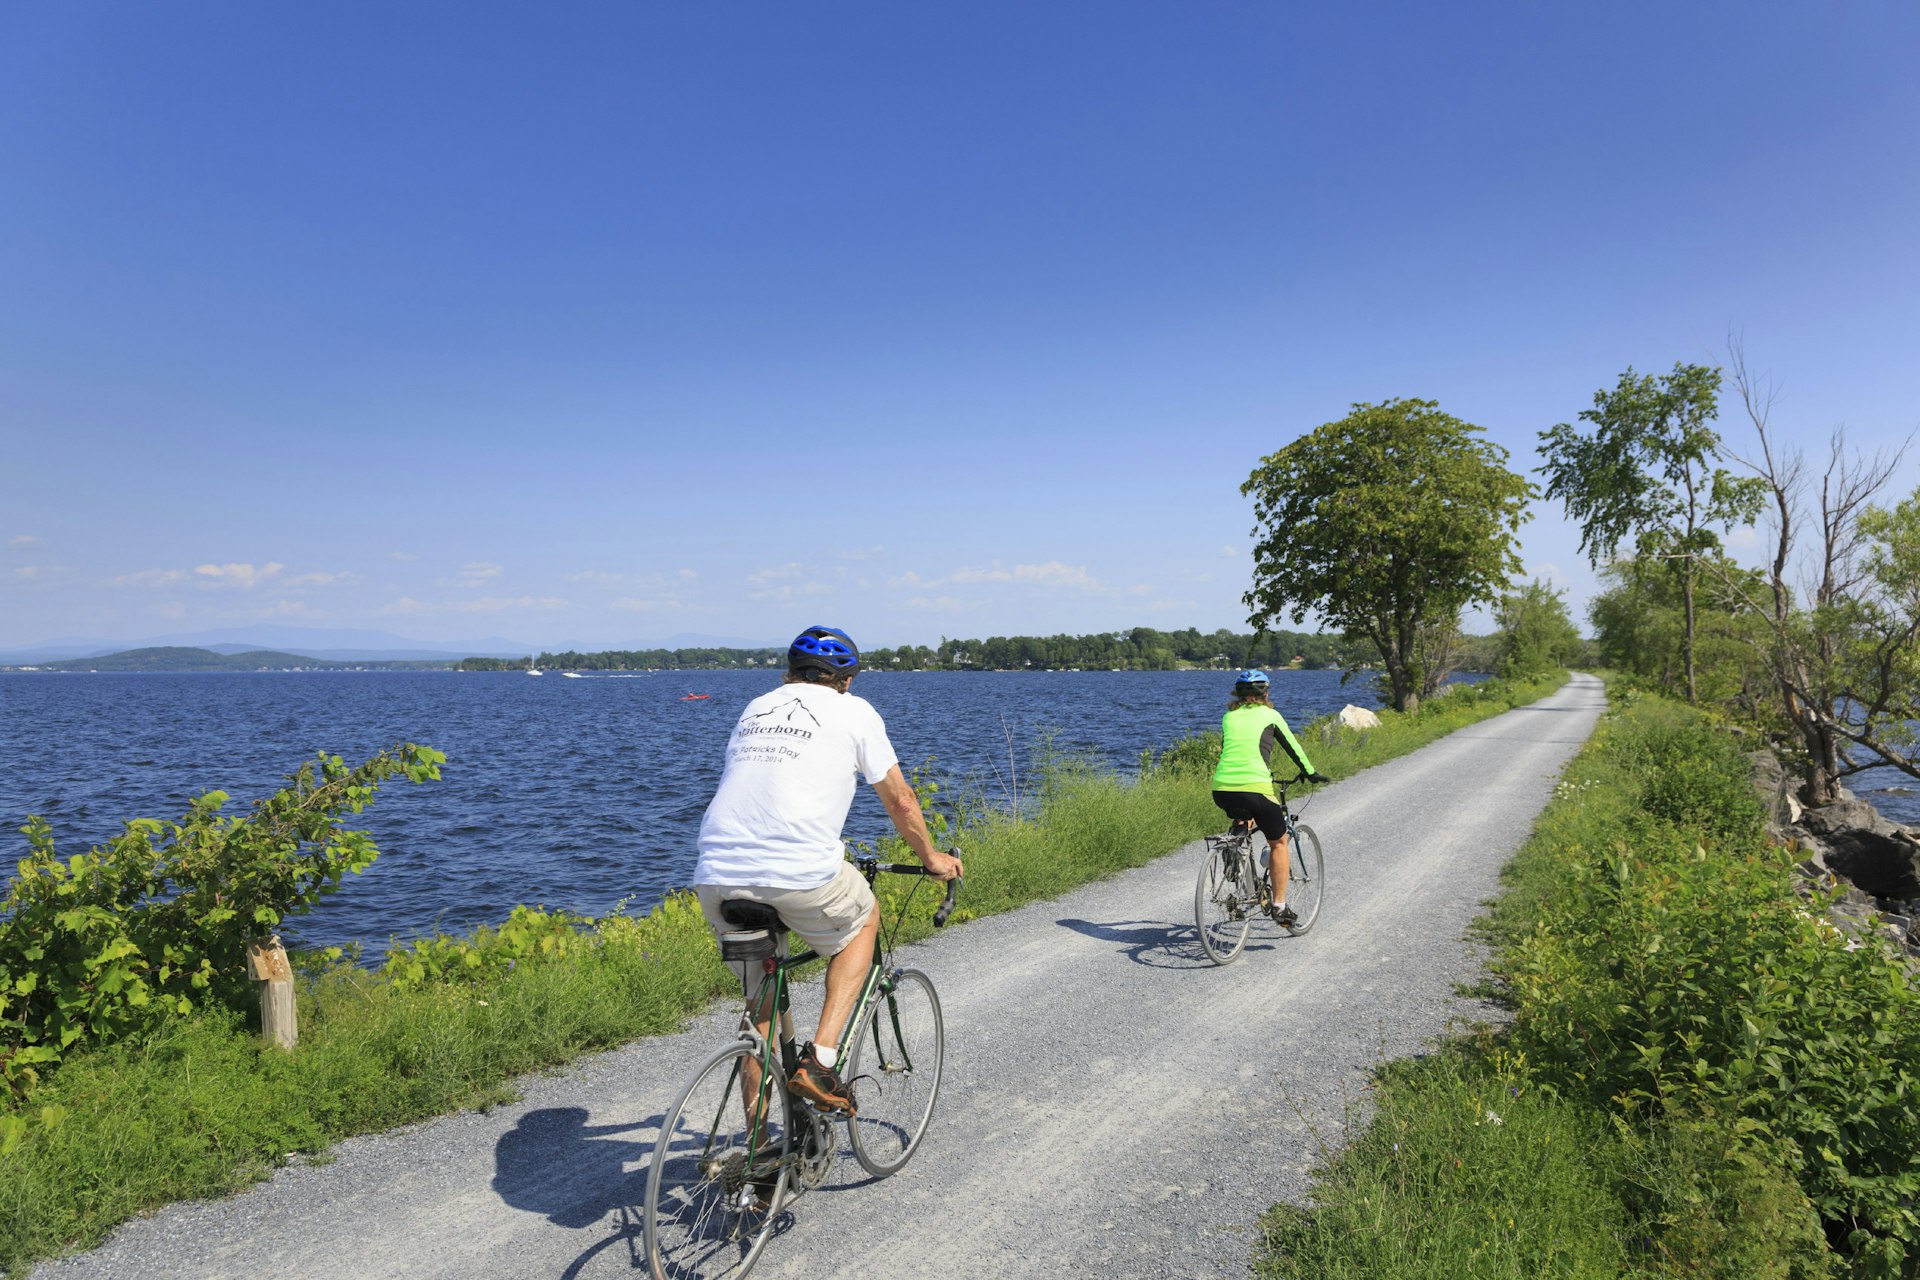 Cyclists ride on the Colchester Causeway on Lake Champlain in Vermont